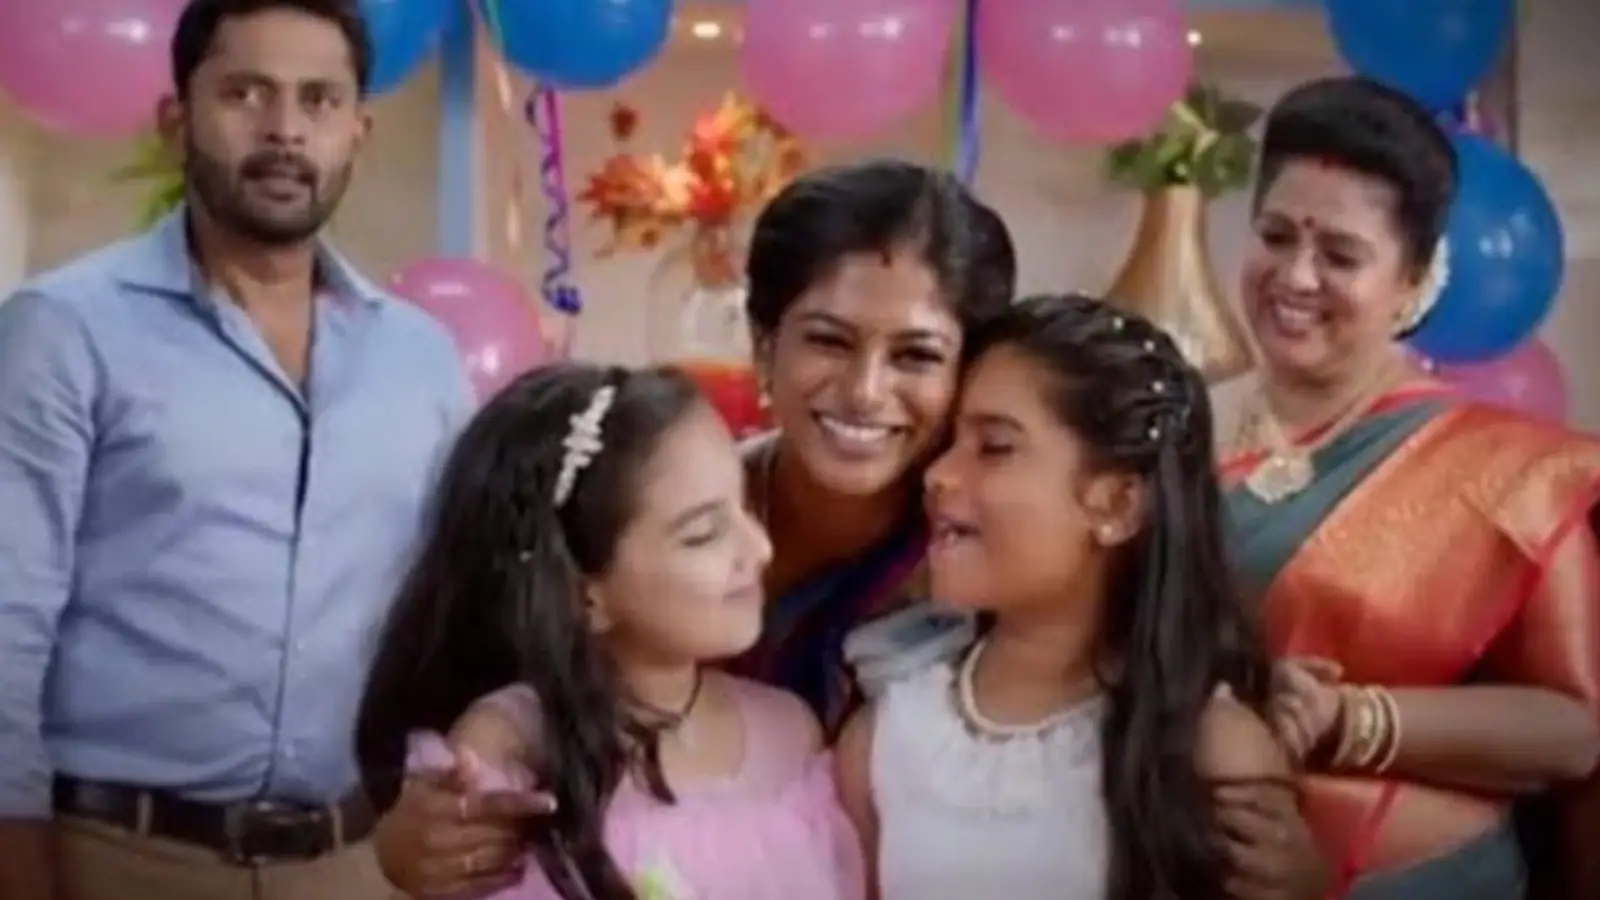 bharathi kannamma serial comes to an end promo video getting viral